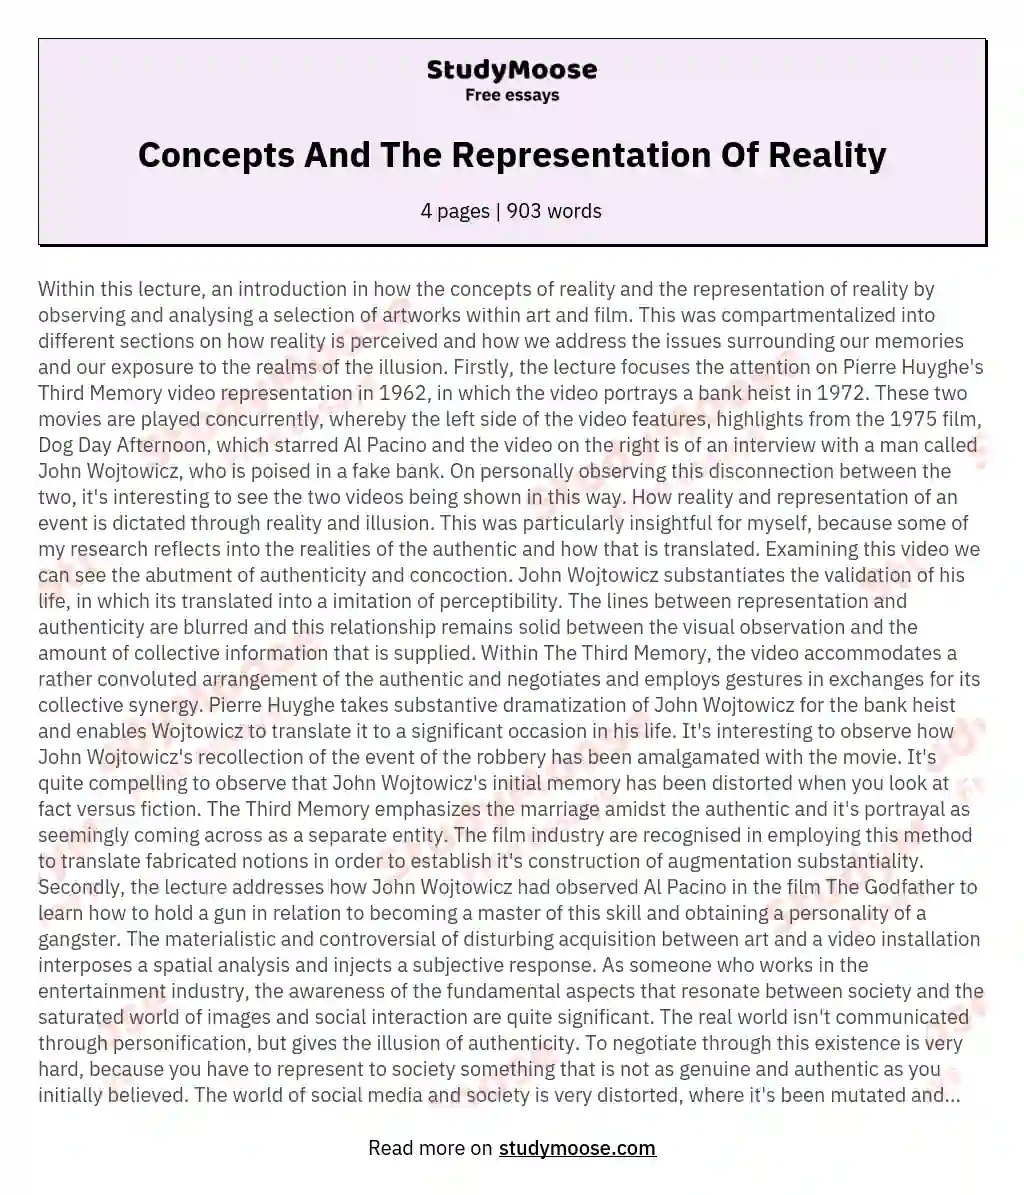 Concepts  And The Representation Of Reality essay